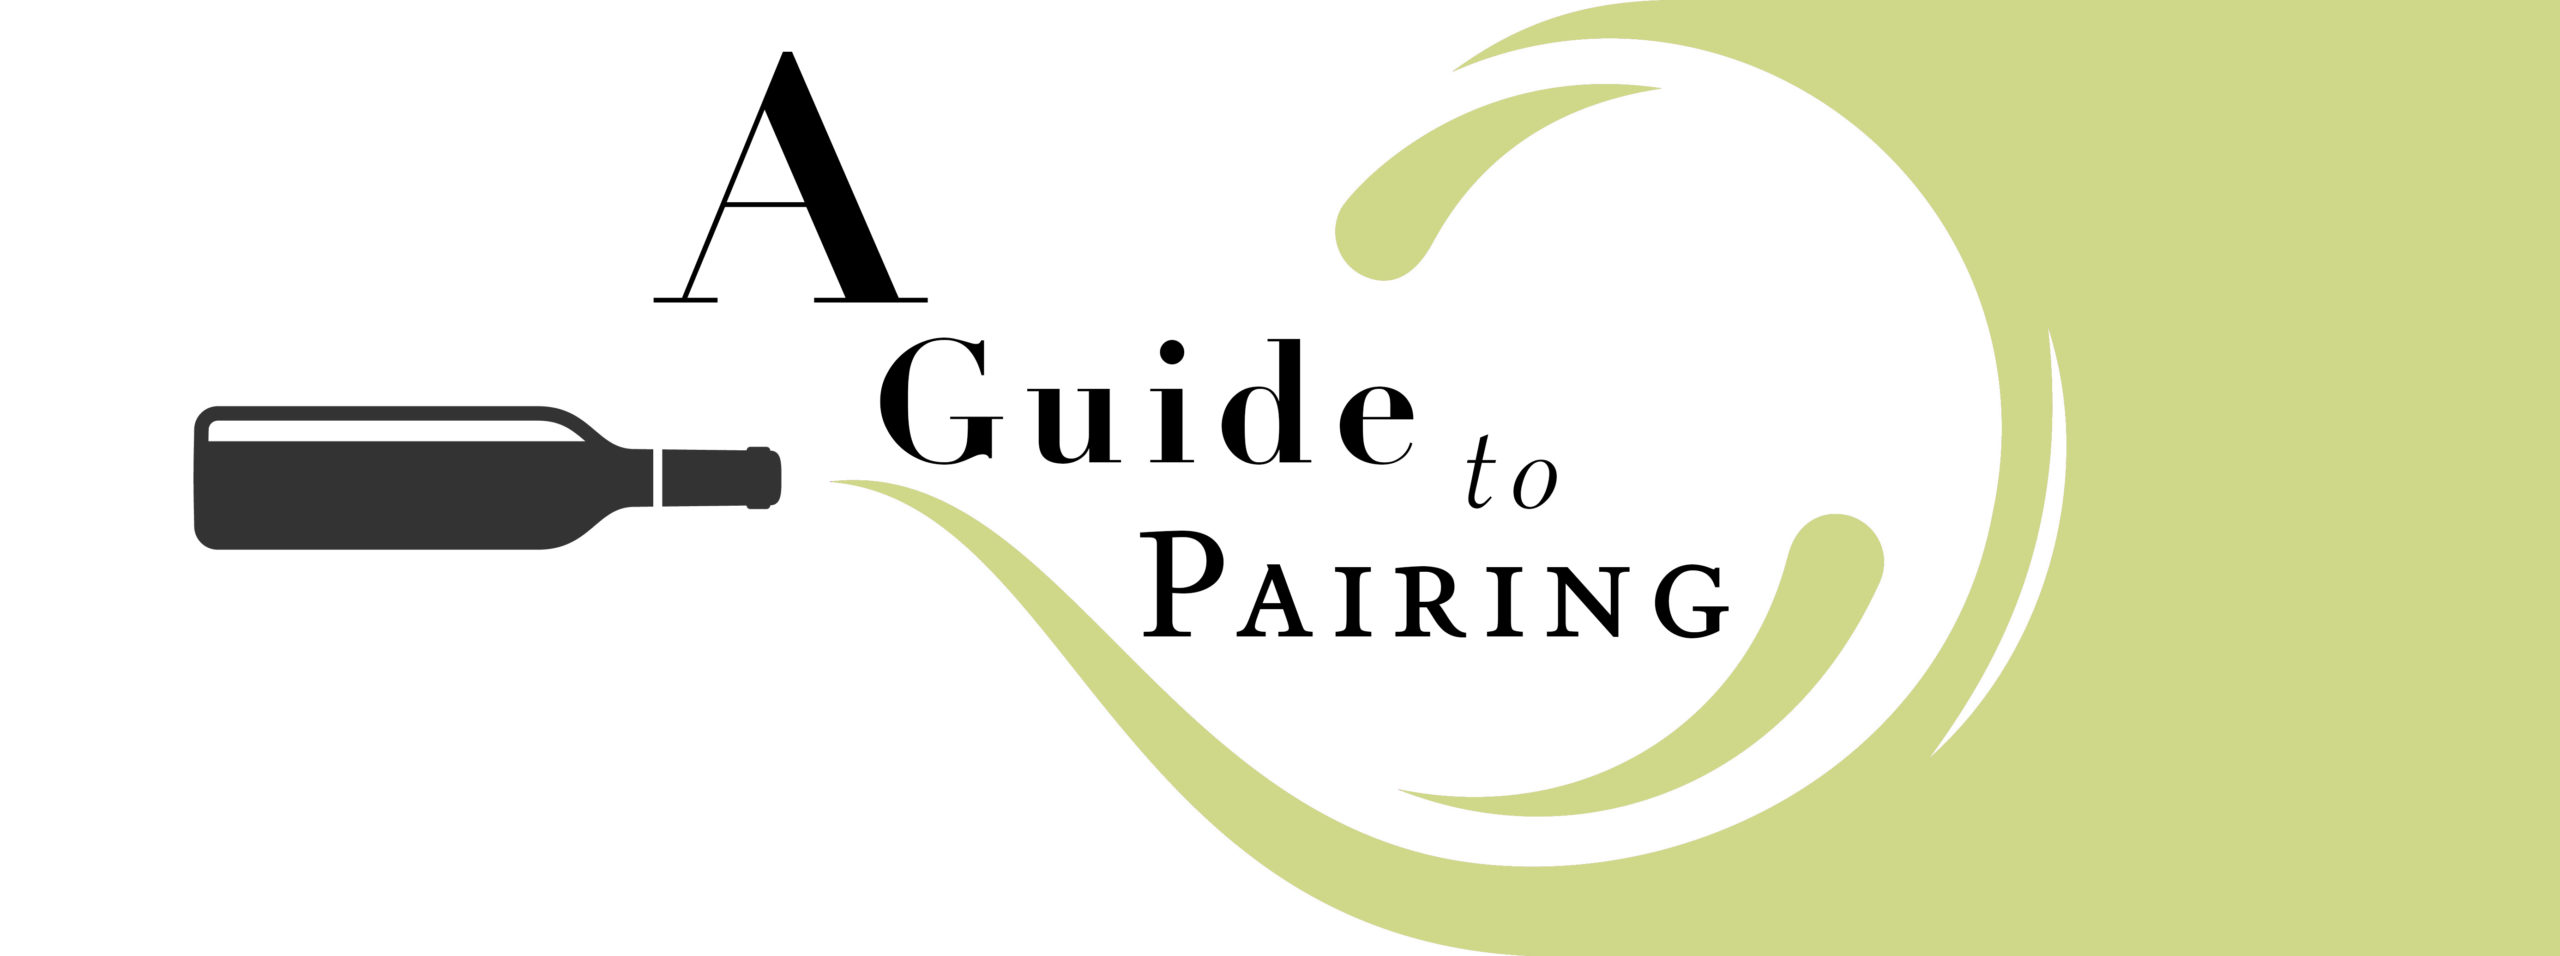 A Guide to Pairing graphic in green with a wine bottle